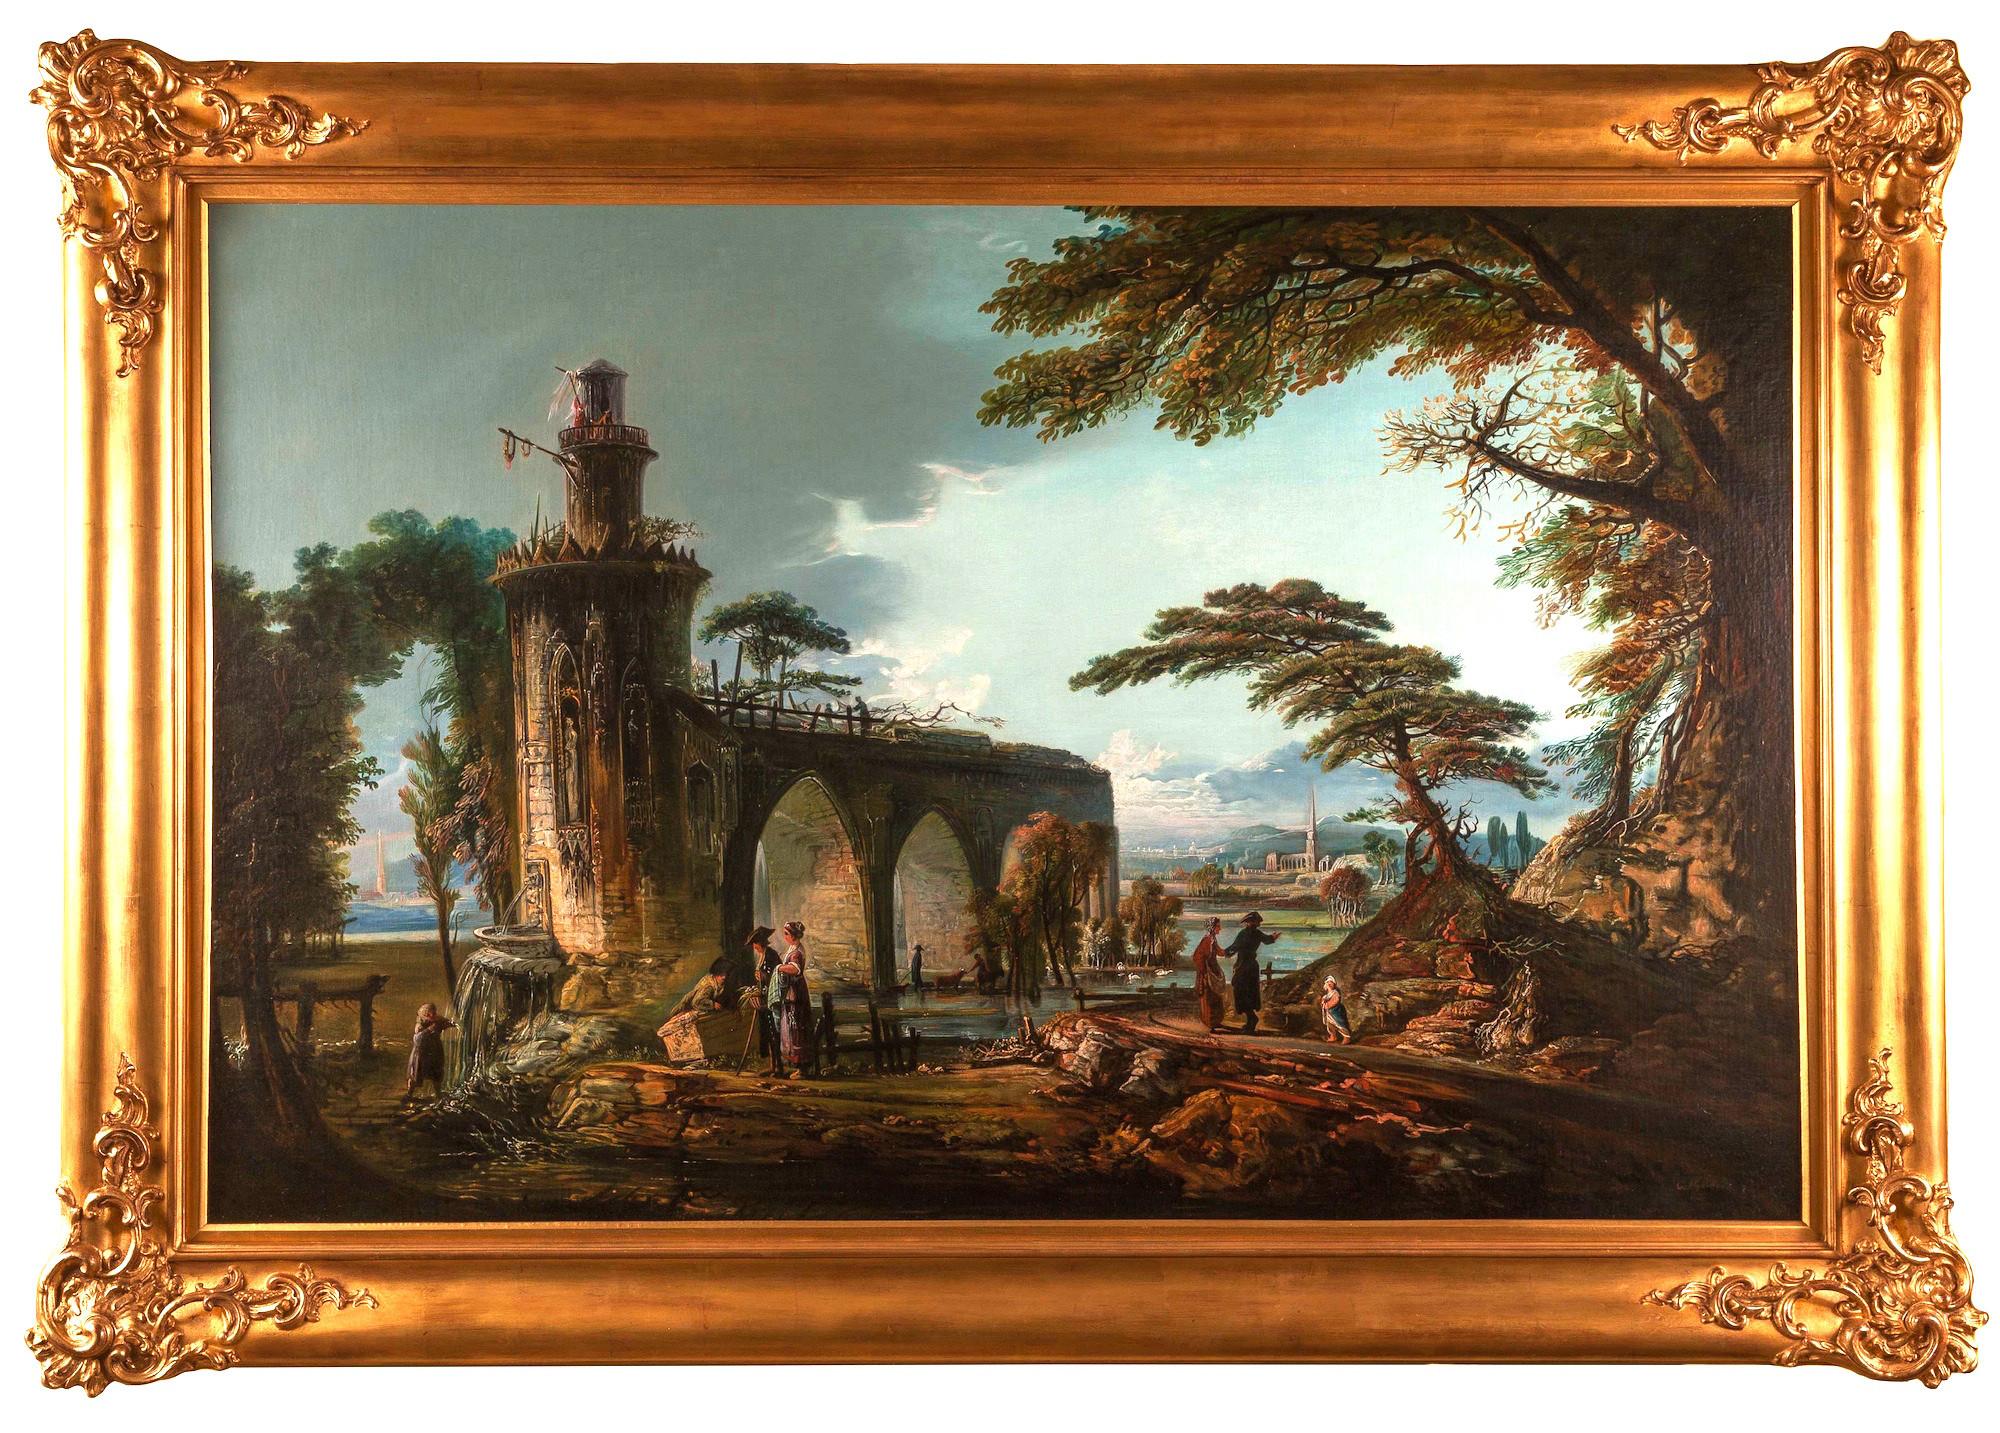 Oil painting; Italian Landscape in the style of Claude Lorraine (1600-1682). 